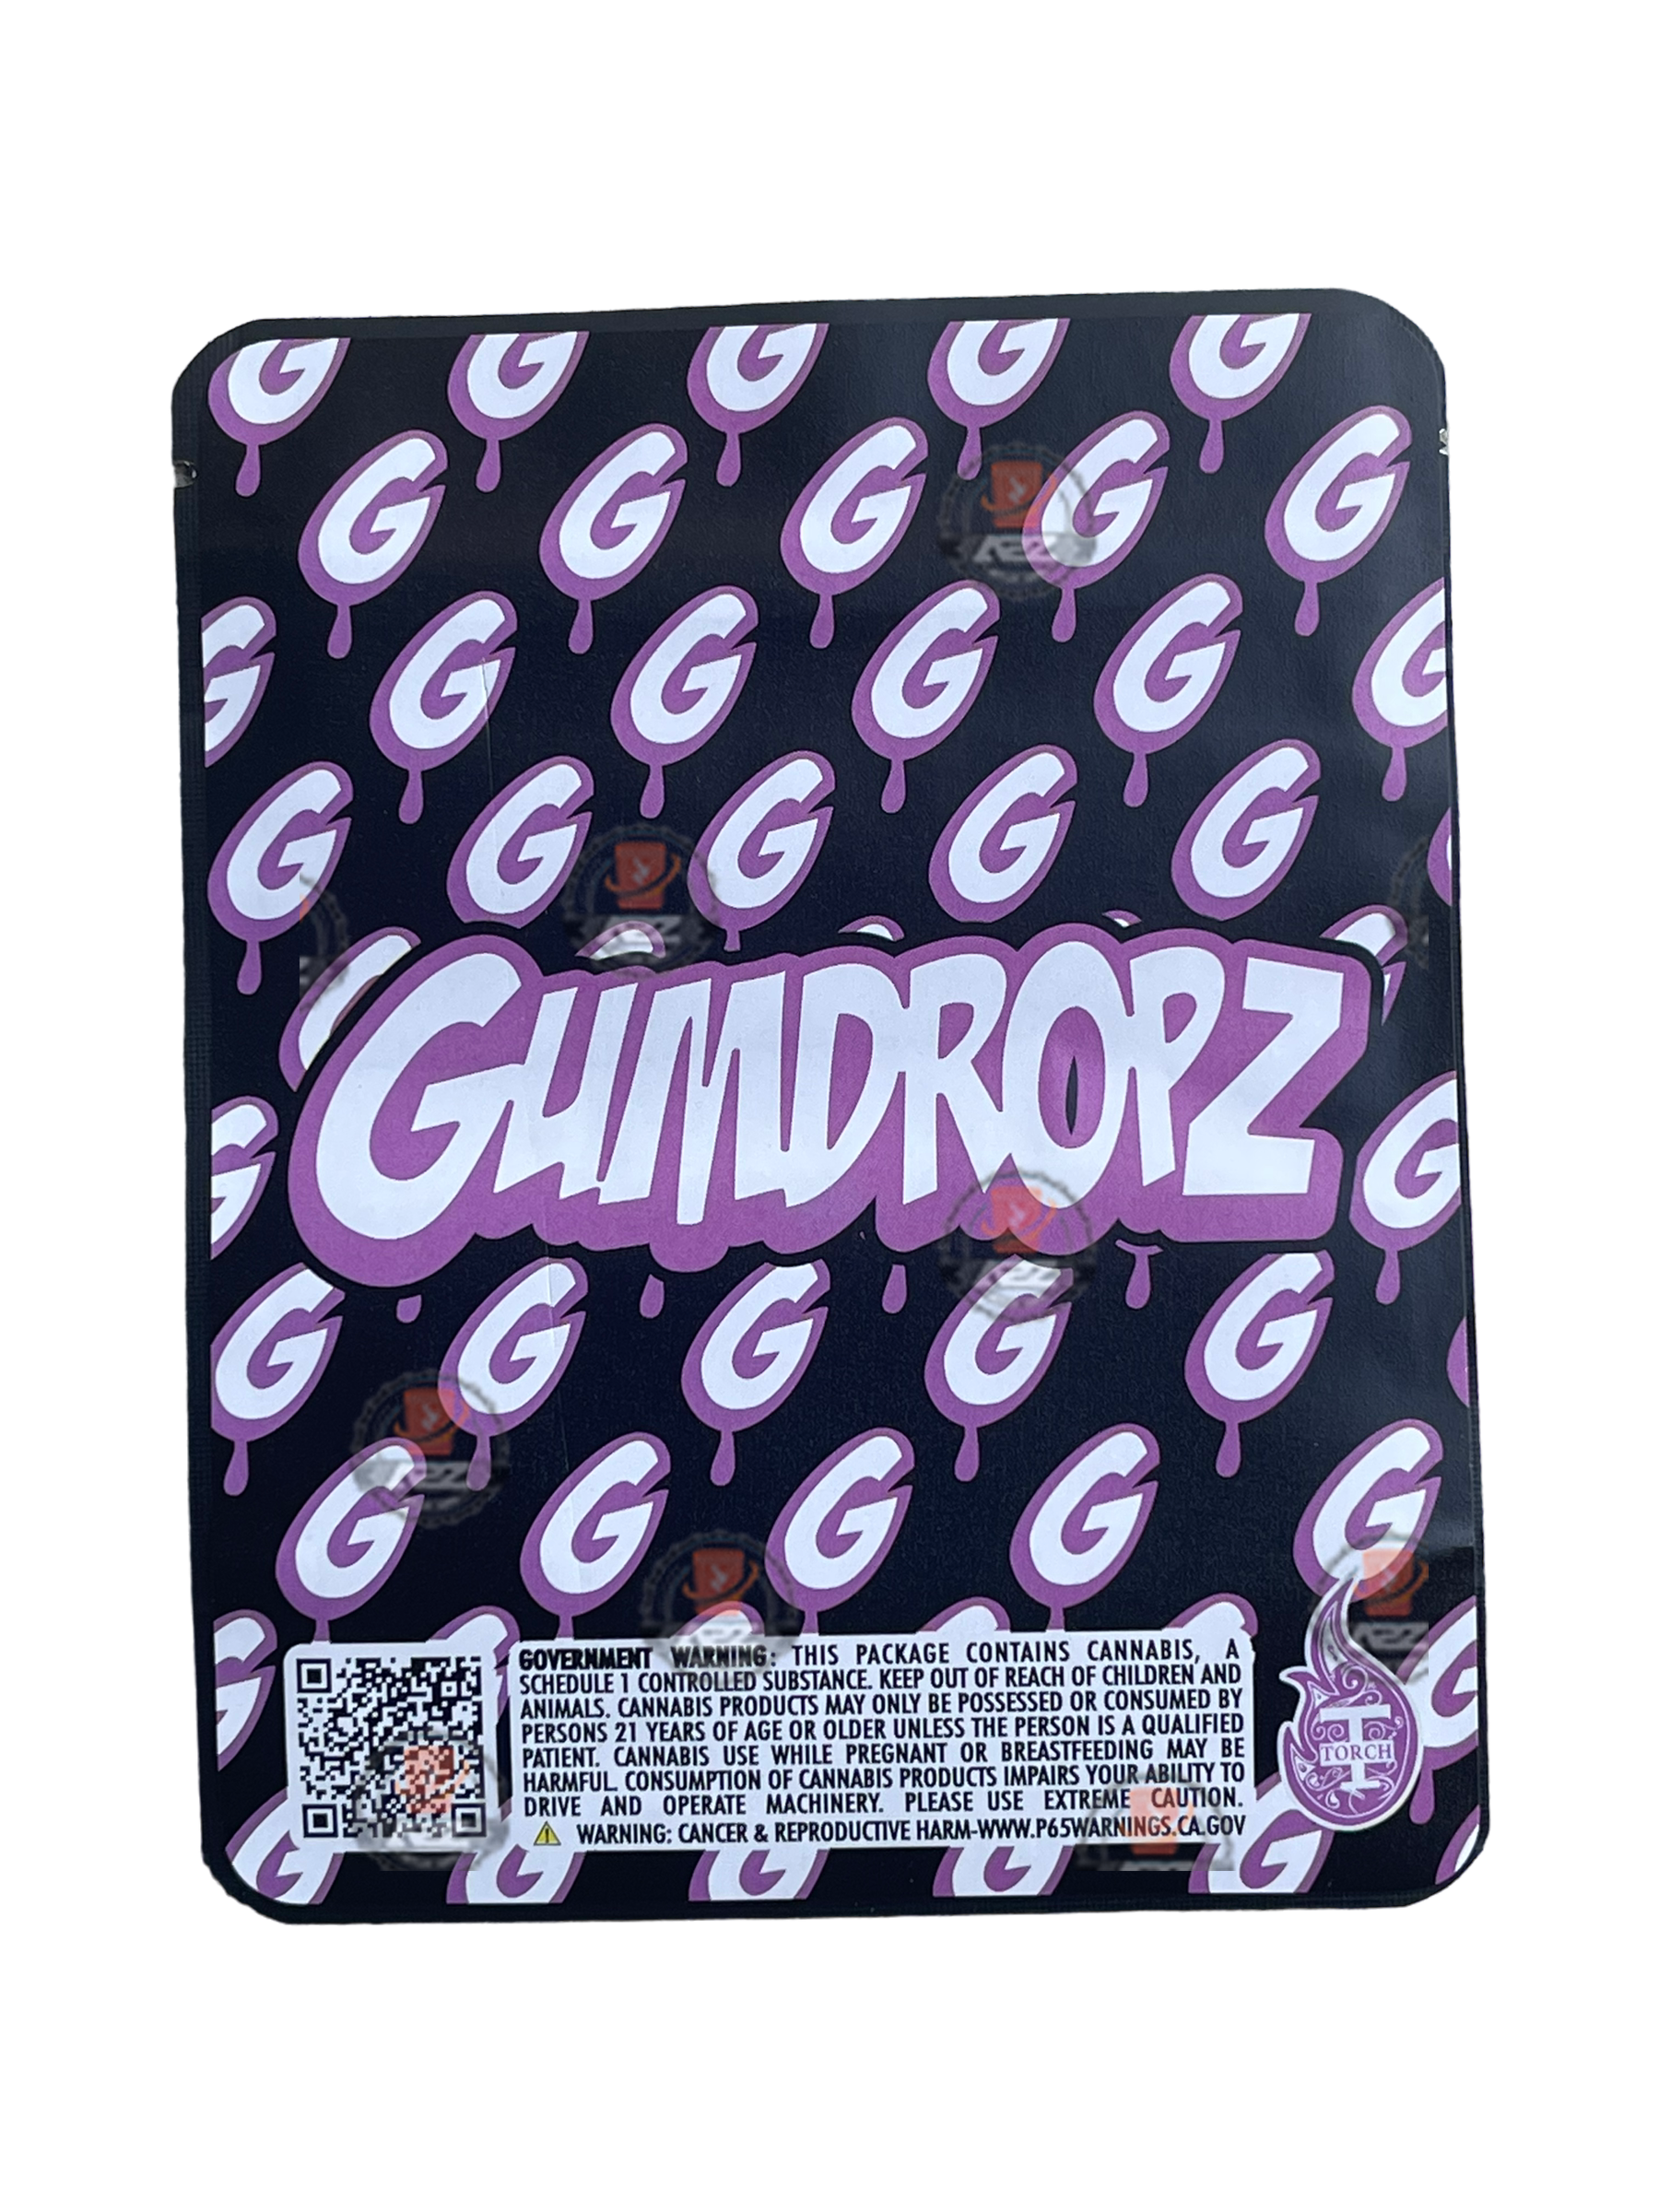 Sprinklez Gumdropz Island Punch Mylar Bags 3.5g Sticker base Bag -With stickers and labels